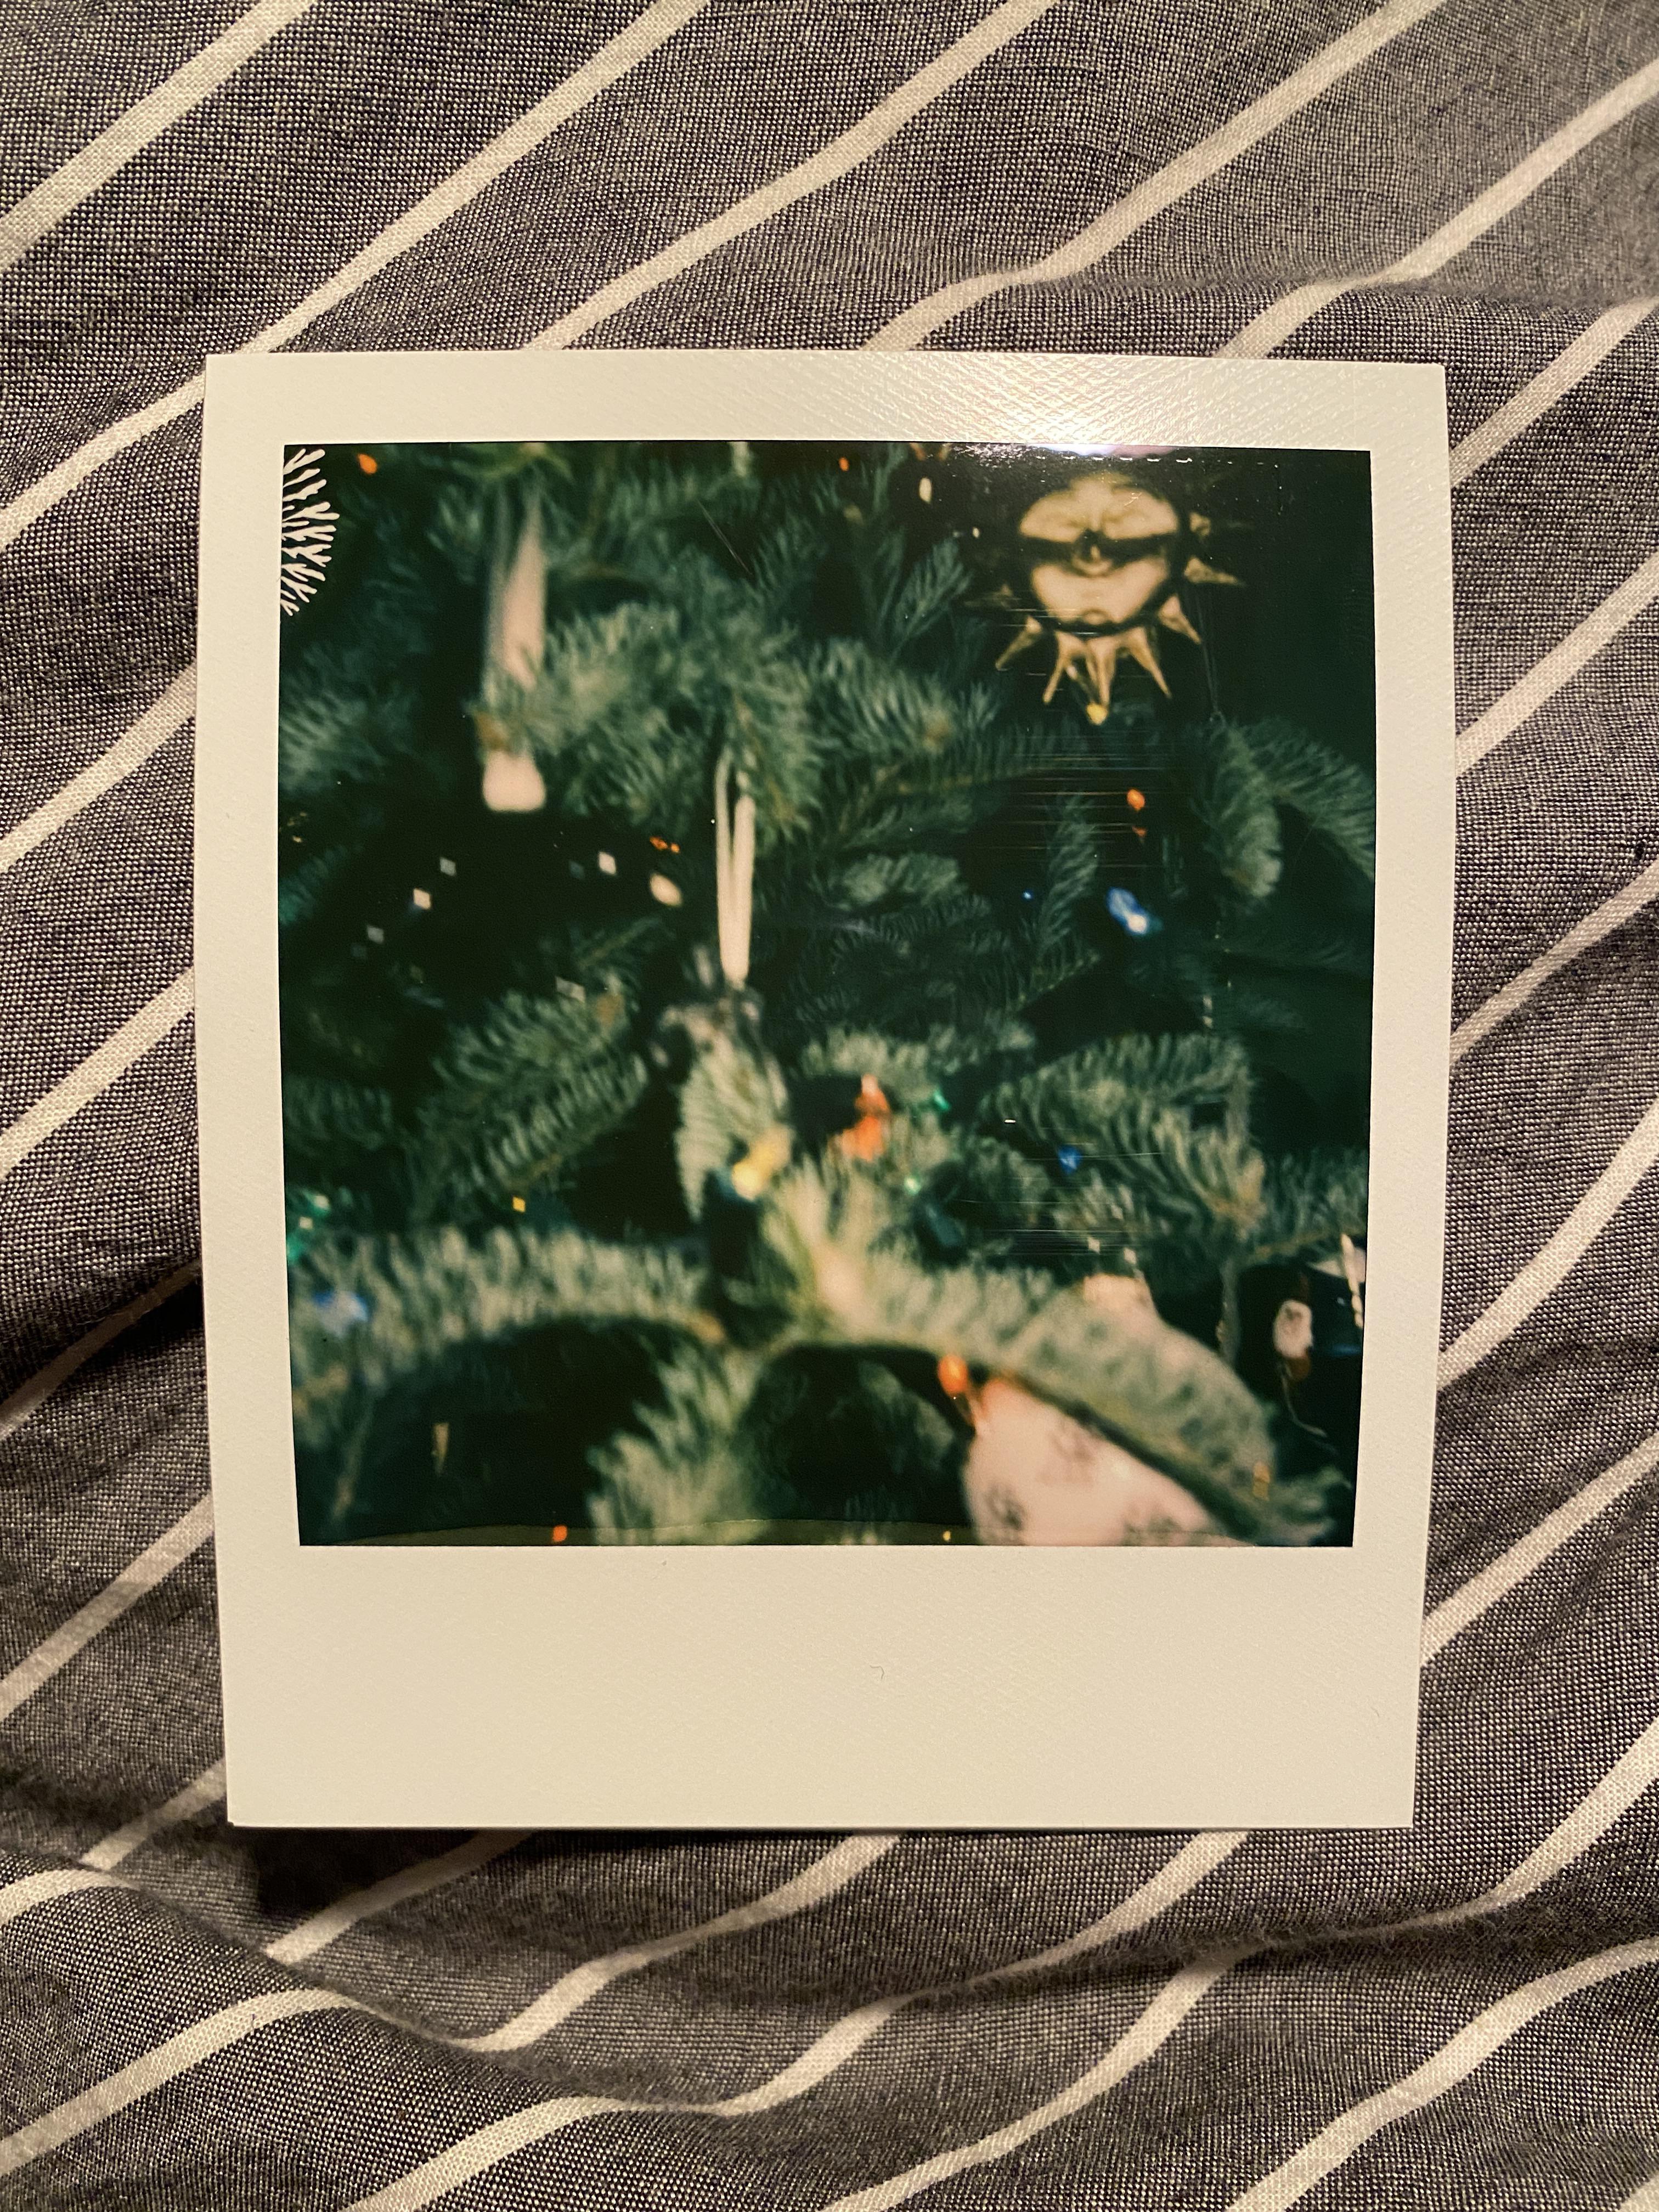 Just got a new Polaroid Now for Christmas, but keep getting this “sparkle” in the top left corner of photo. It happens regardless of film pack, and I've cleaned the rollers